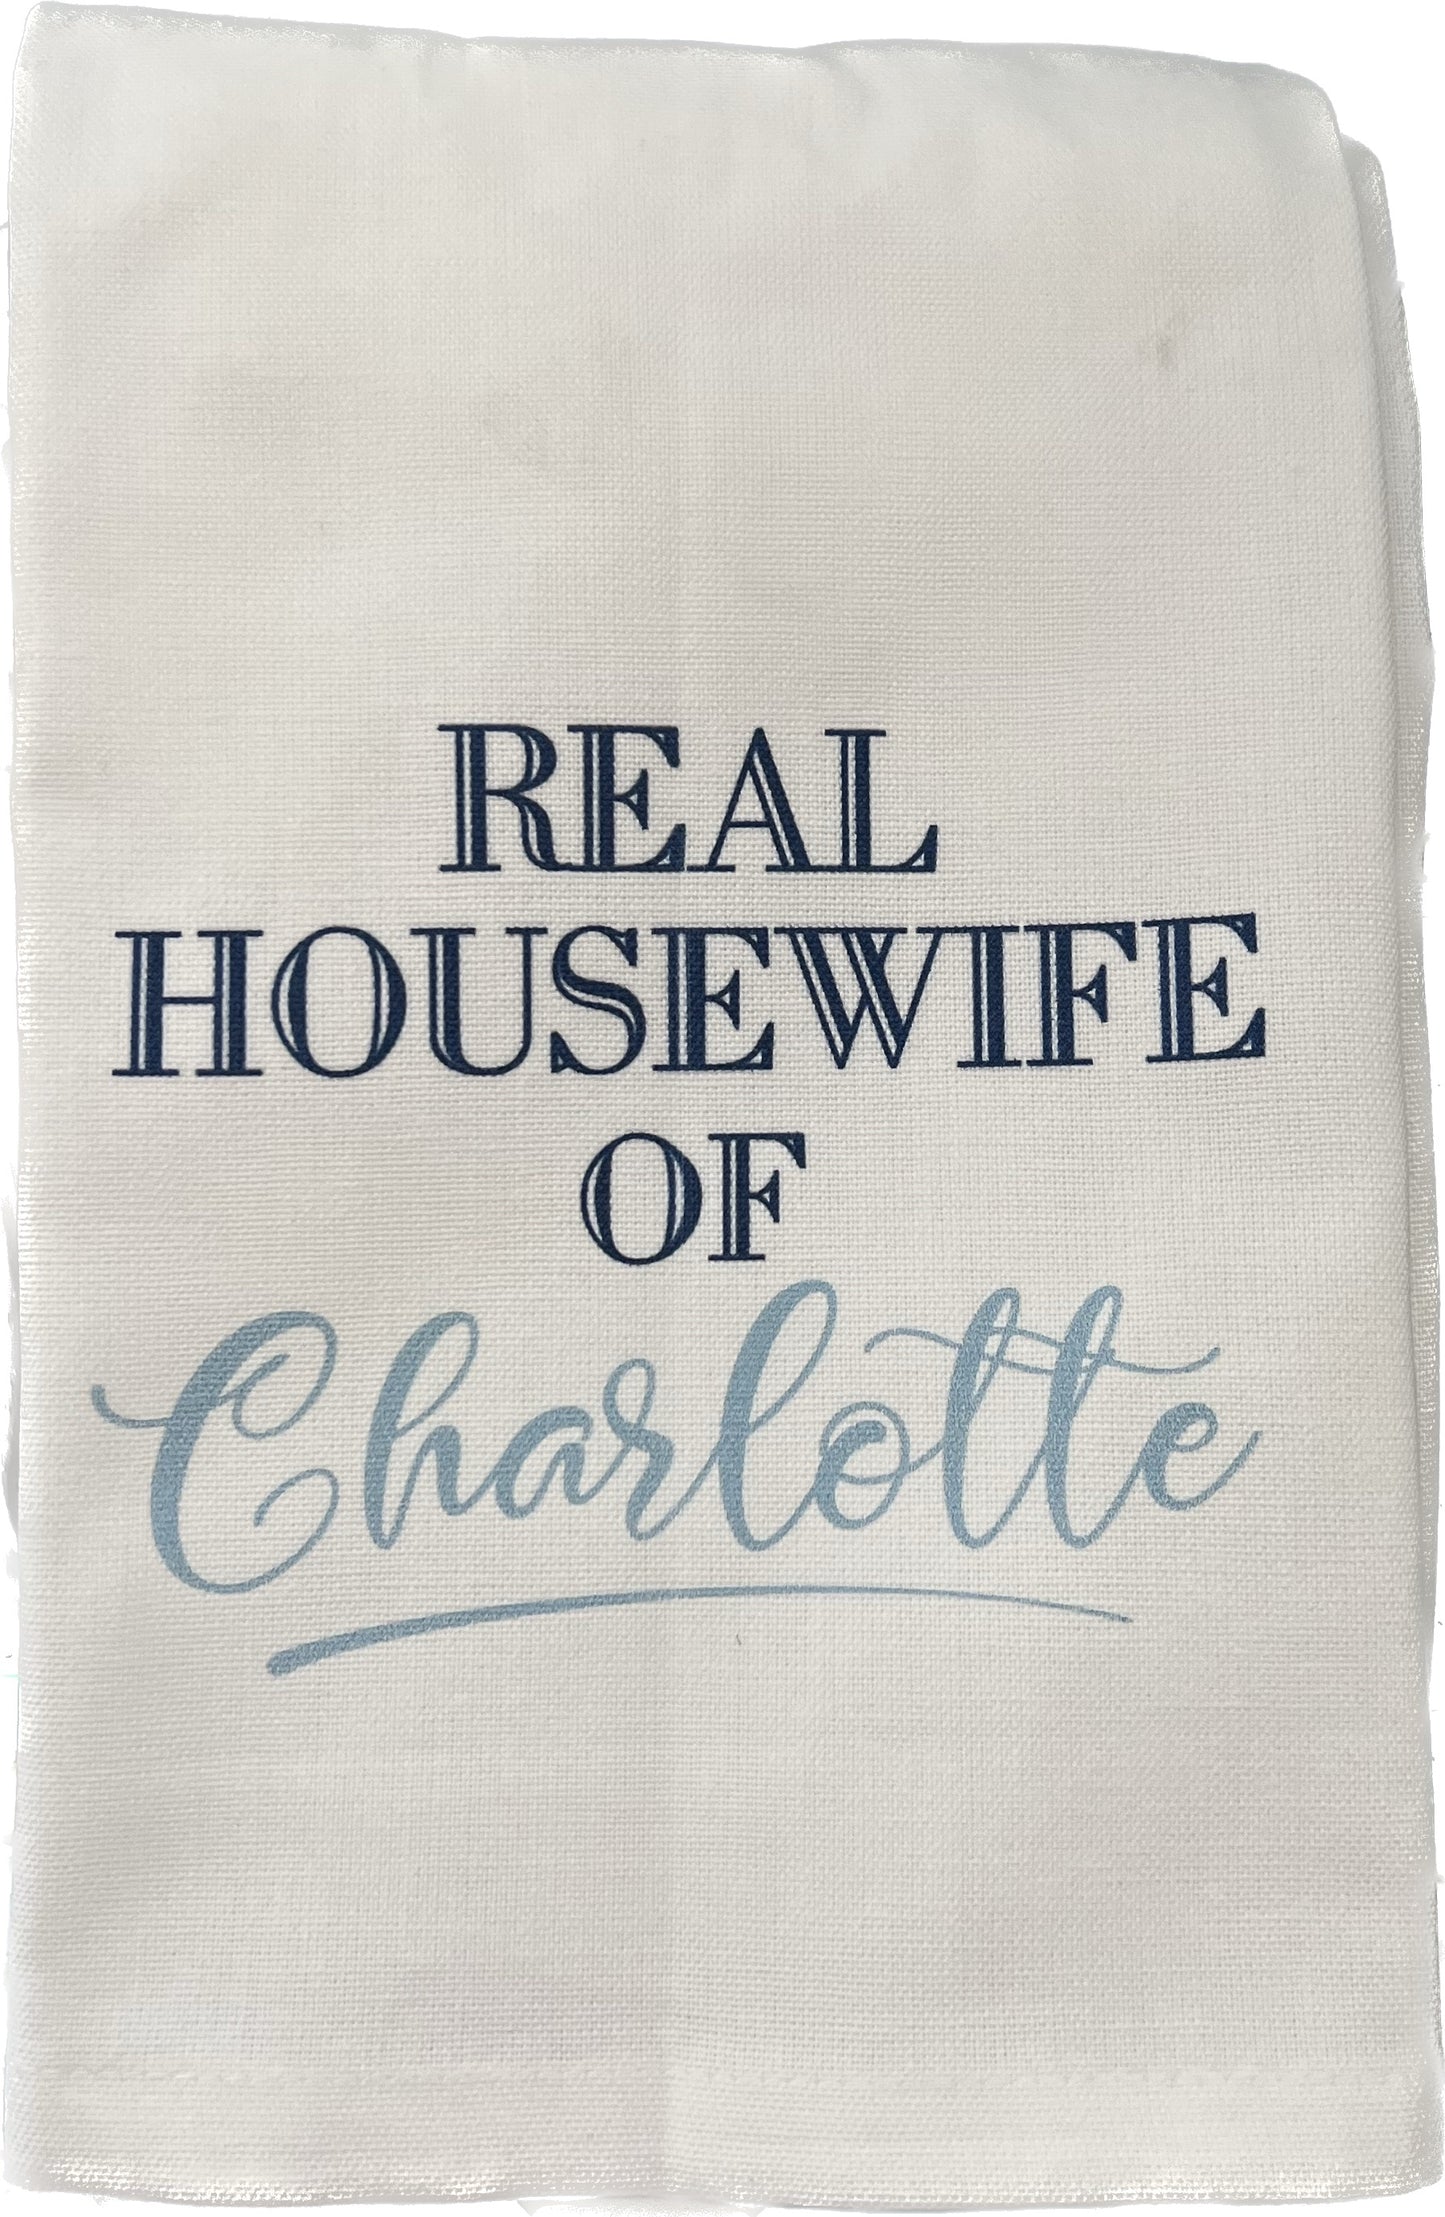 Real Housewife of Charlotte Kitchen Towel